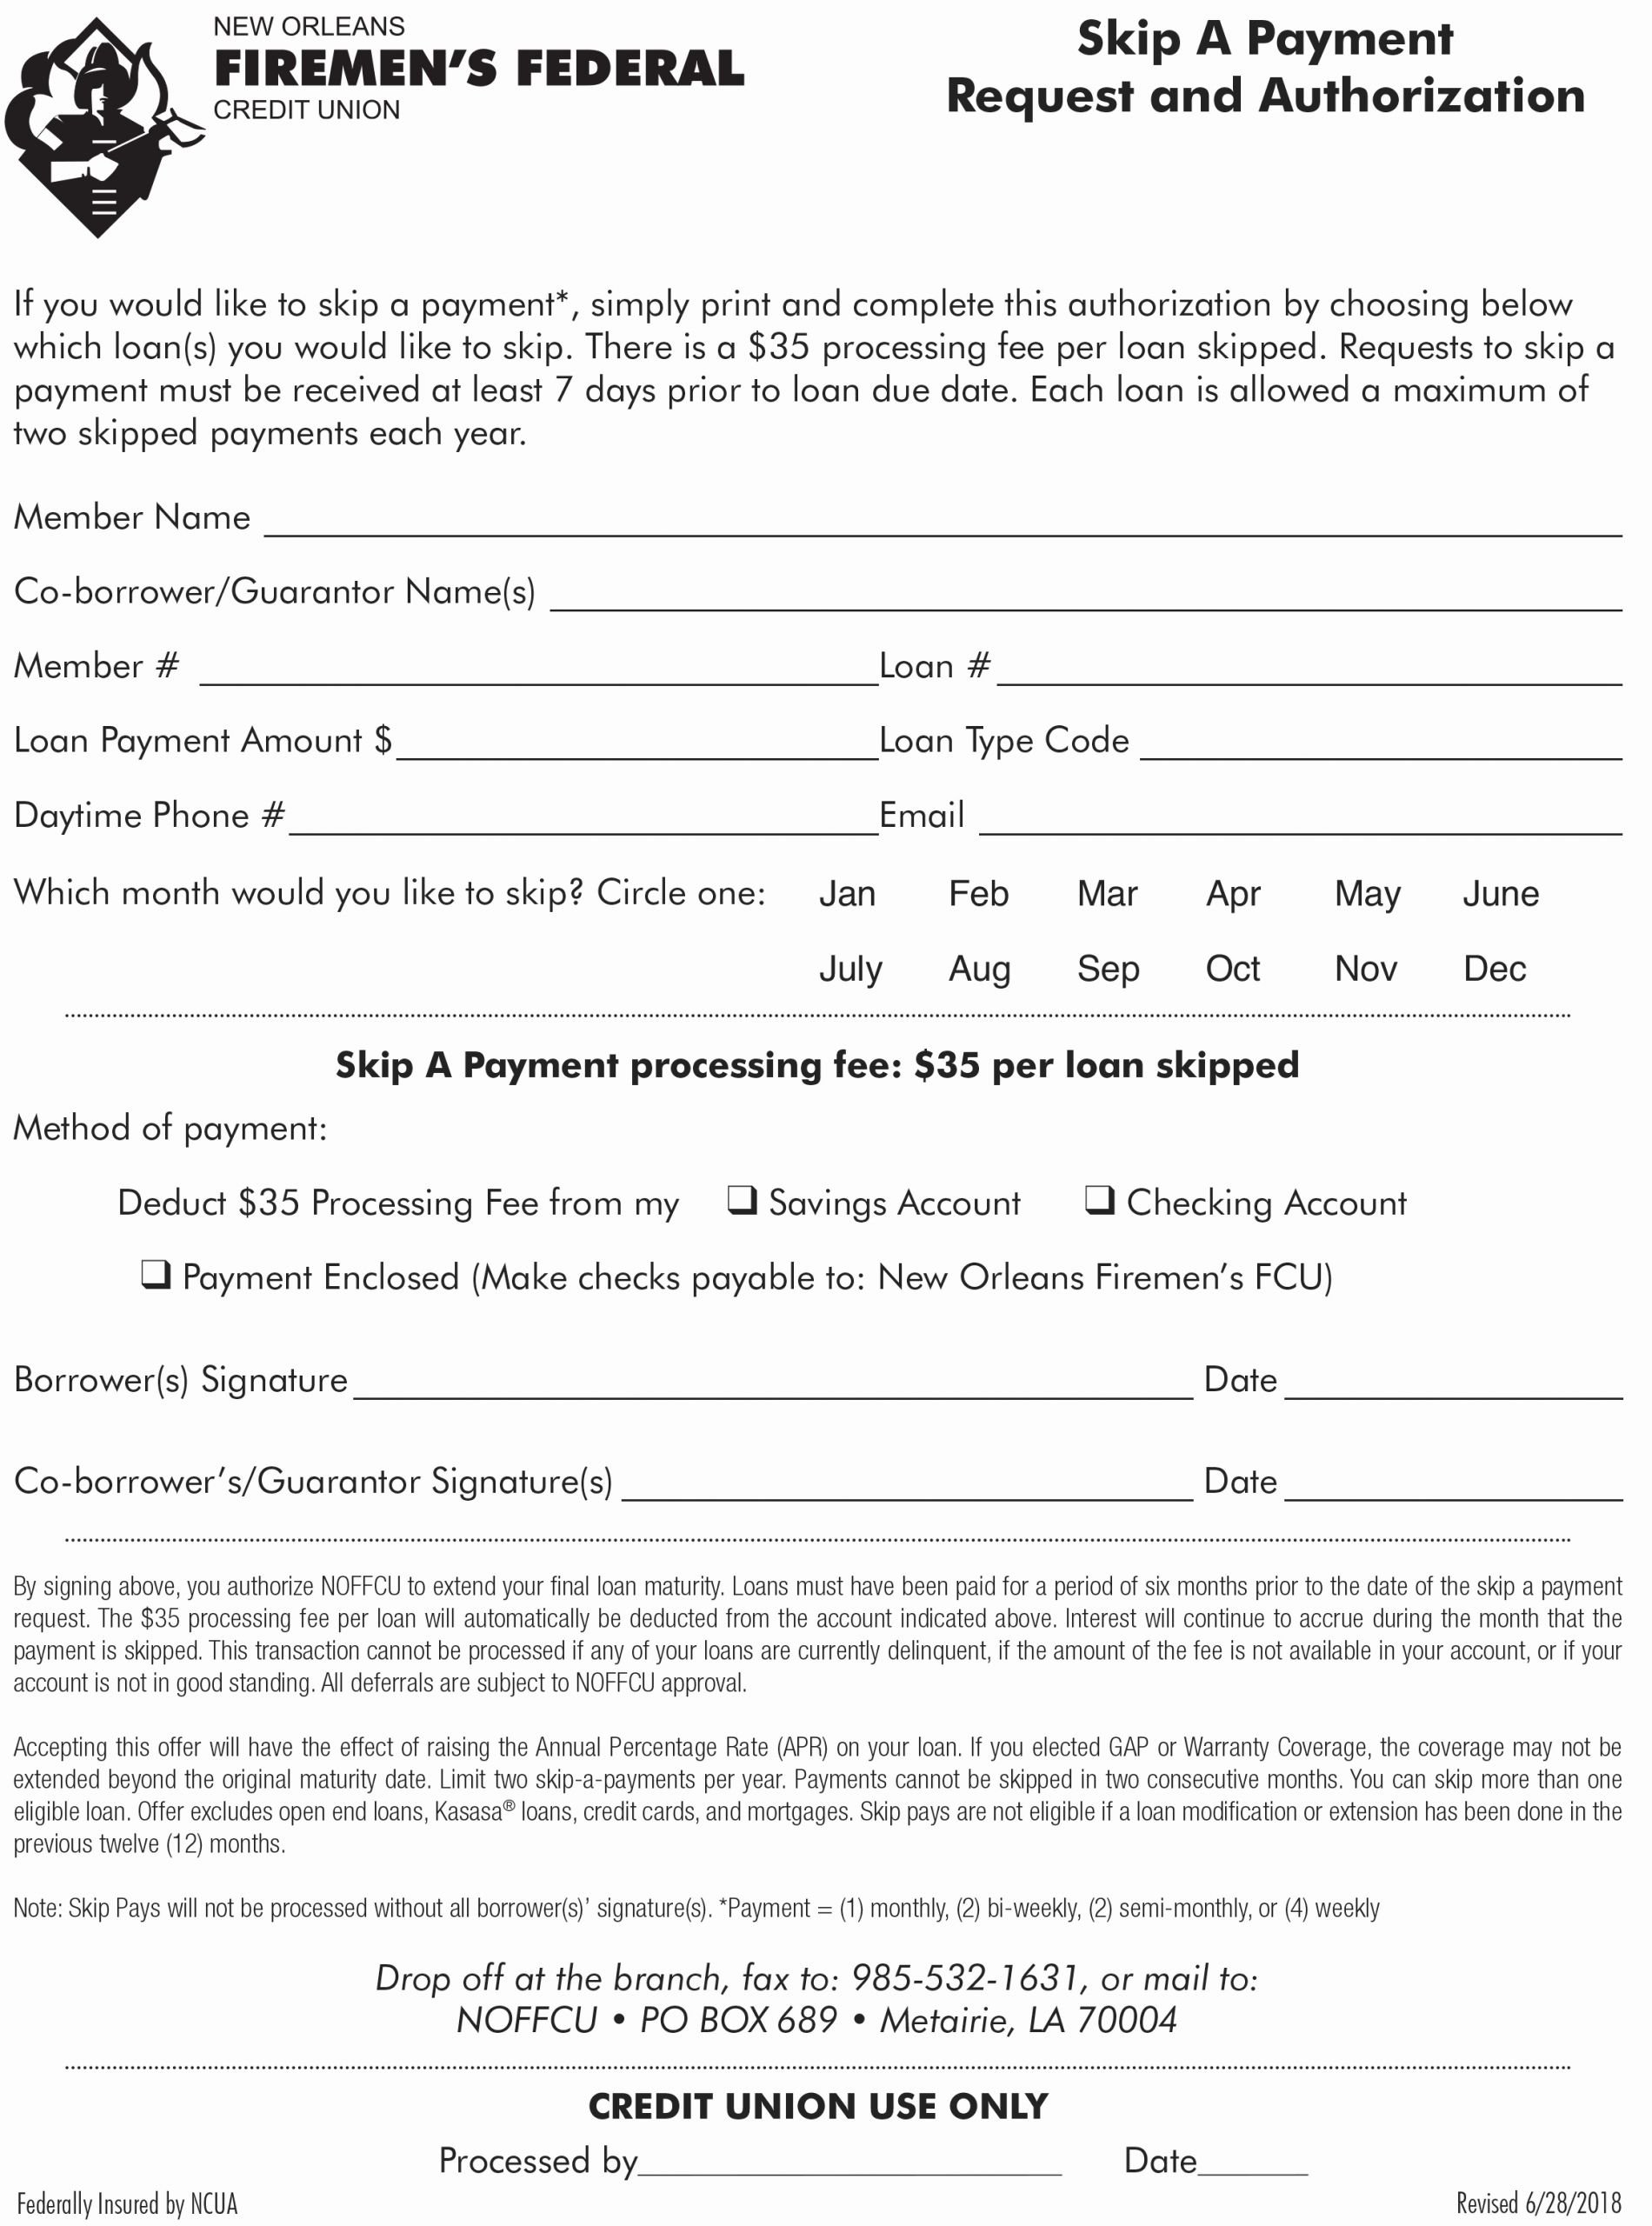 Printable Payment Coupons Elegant New orleans Firemen S Fcu Contact Us Skip A Payment Coupon